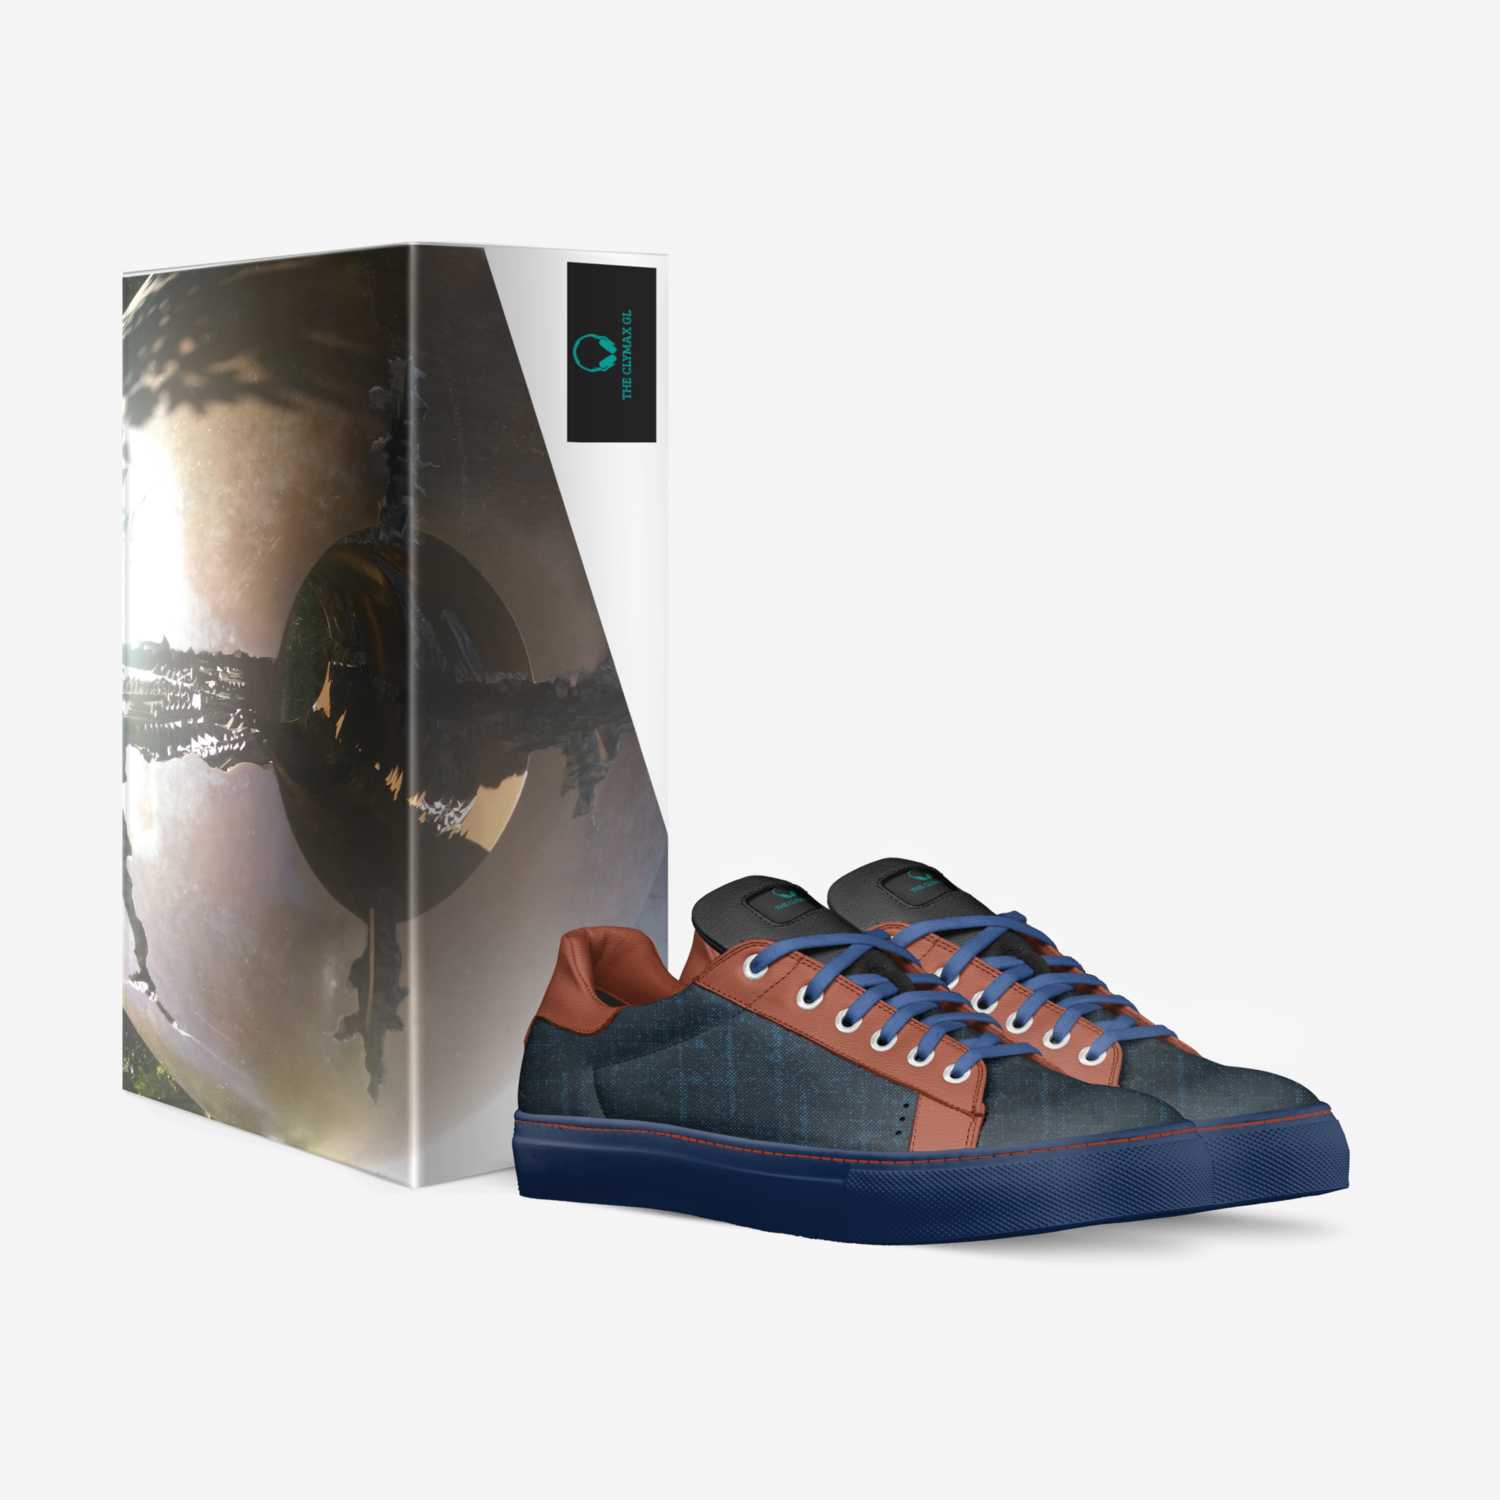 The Clymax Gl custom made in Italy shoes by Musicis Mylife | Box view